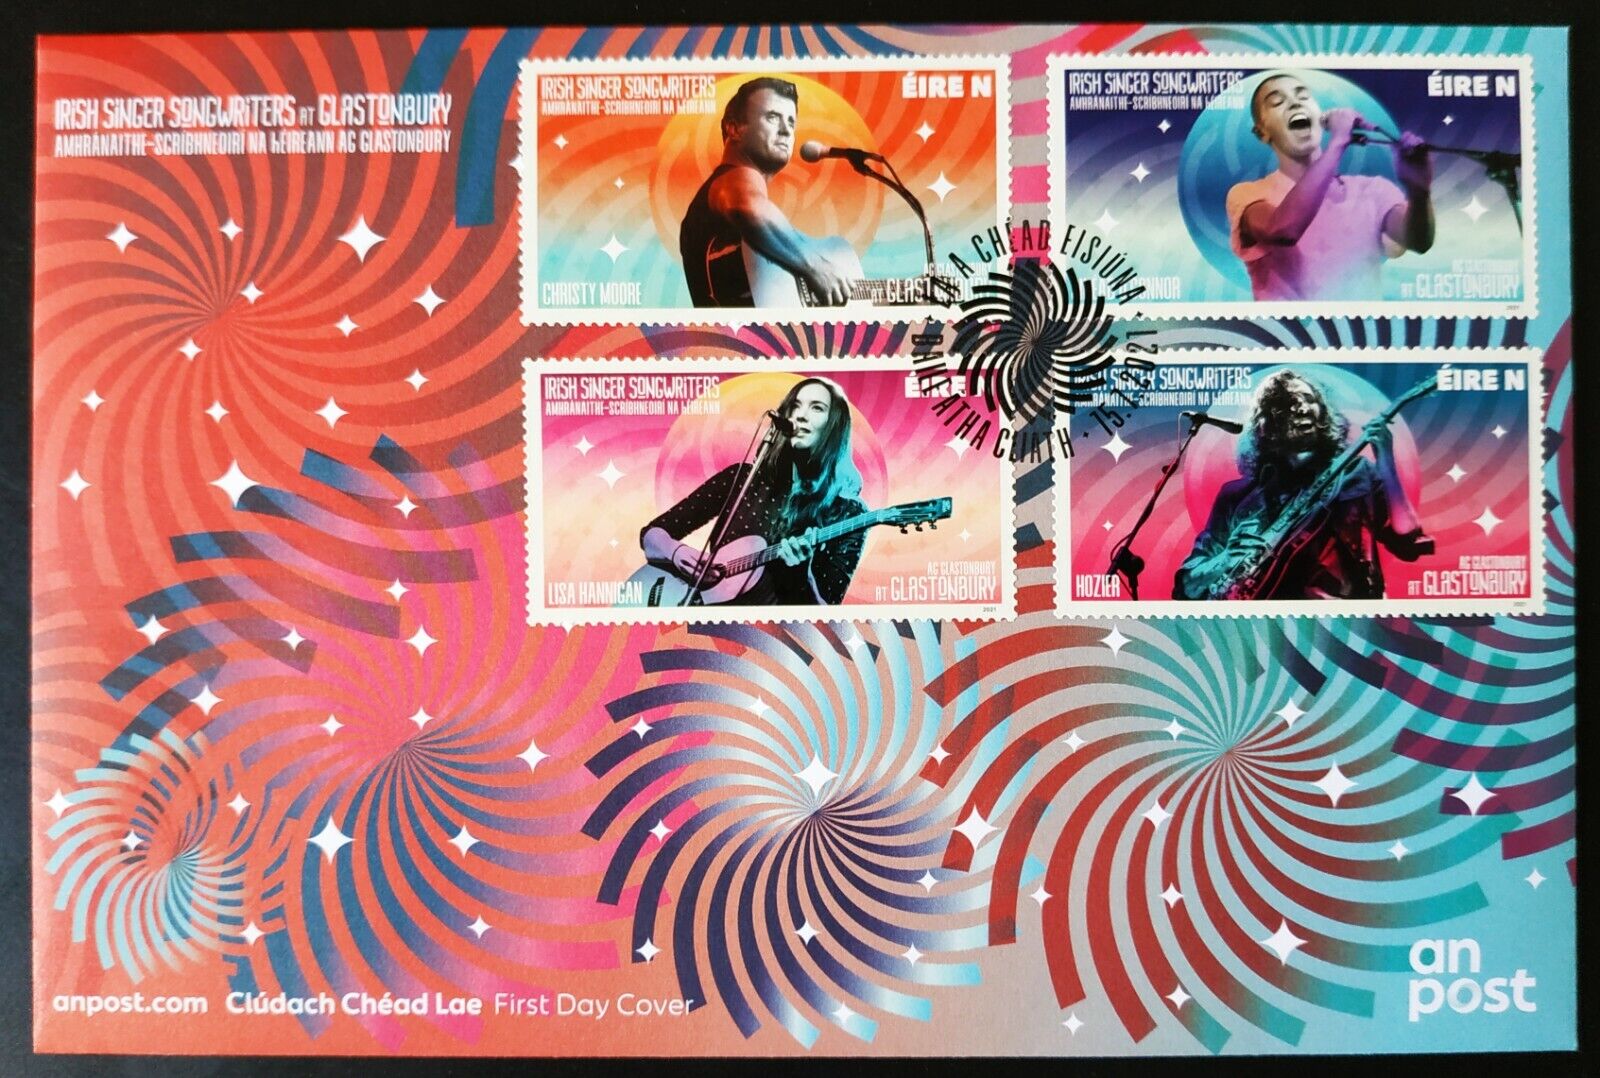 IRELAND 2021 IRISH SINGER/SONGWRITERS NEW ISSUE FDC SINEAD O'CONNOR-HOZIER-MOORE